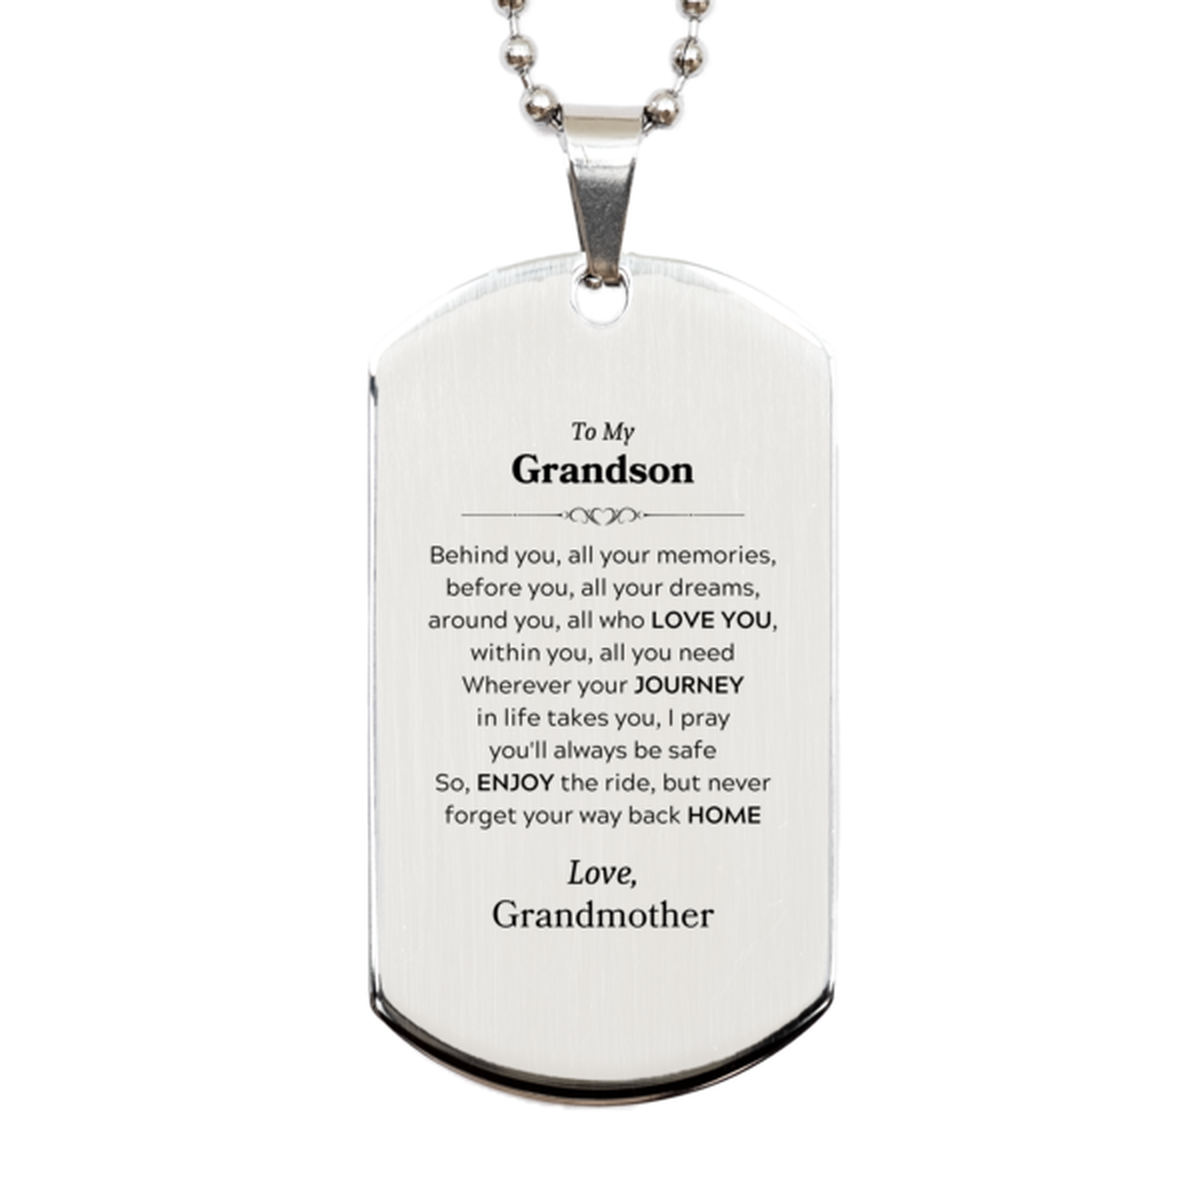 To My Grandson Graduation Gifts from Grandmother, Grandson Silver Dog Tag Christmas Birthday Gifts for Grandson Behind you, all your memories, before you, all your dreams. Love, Grandmother